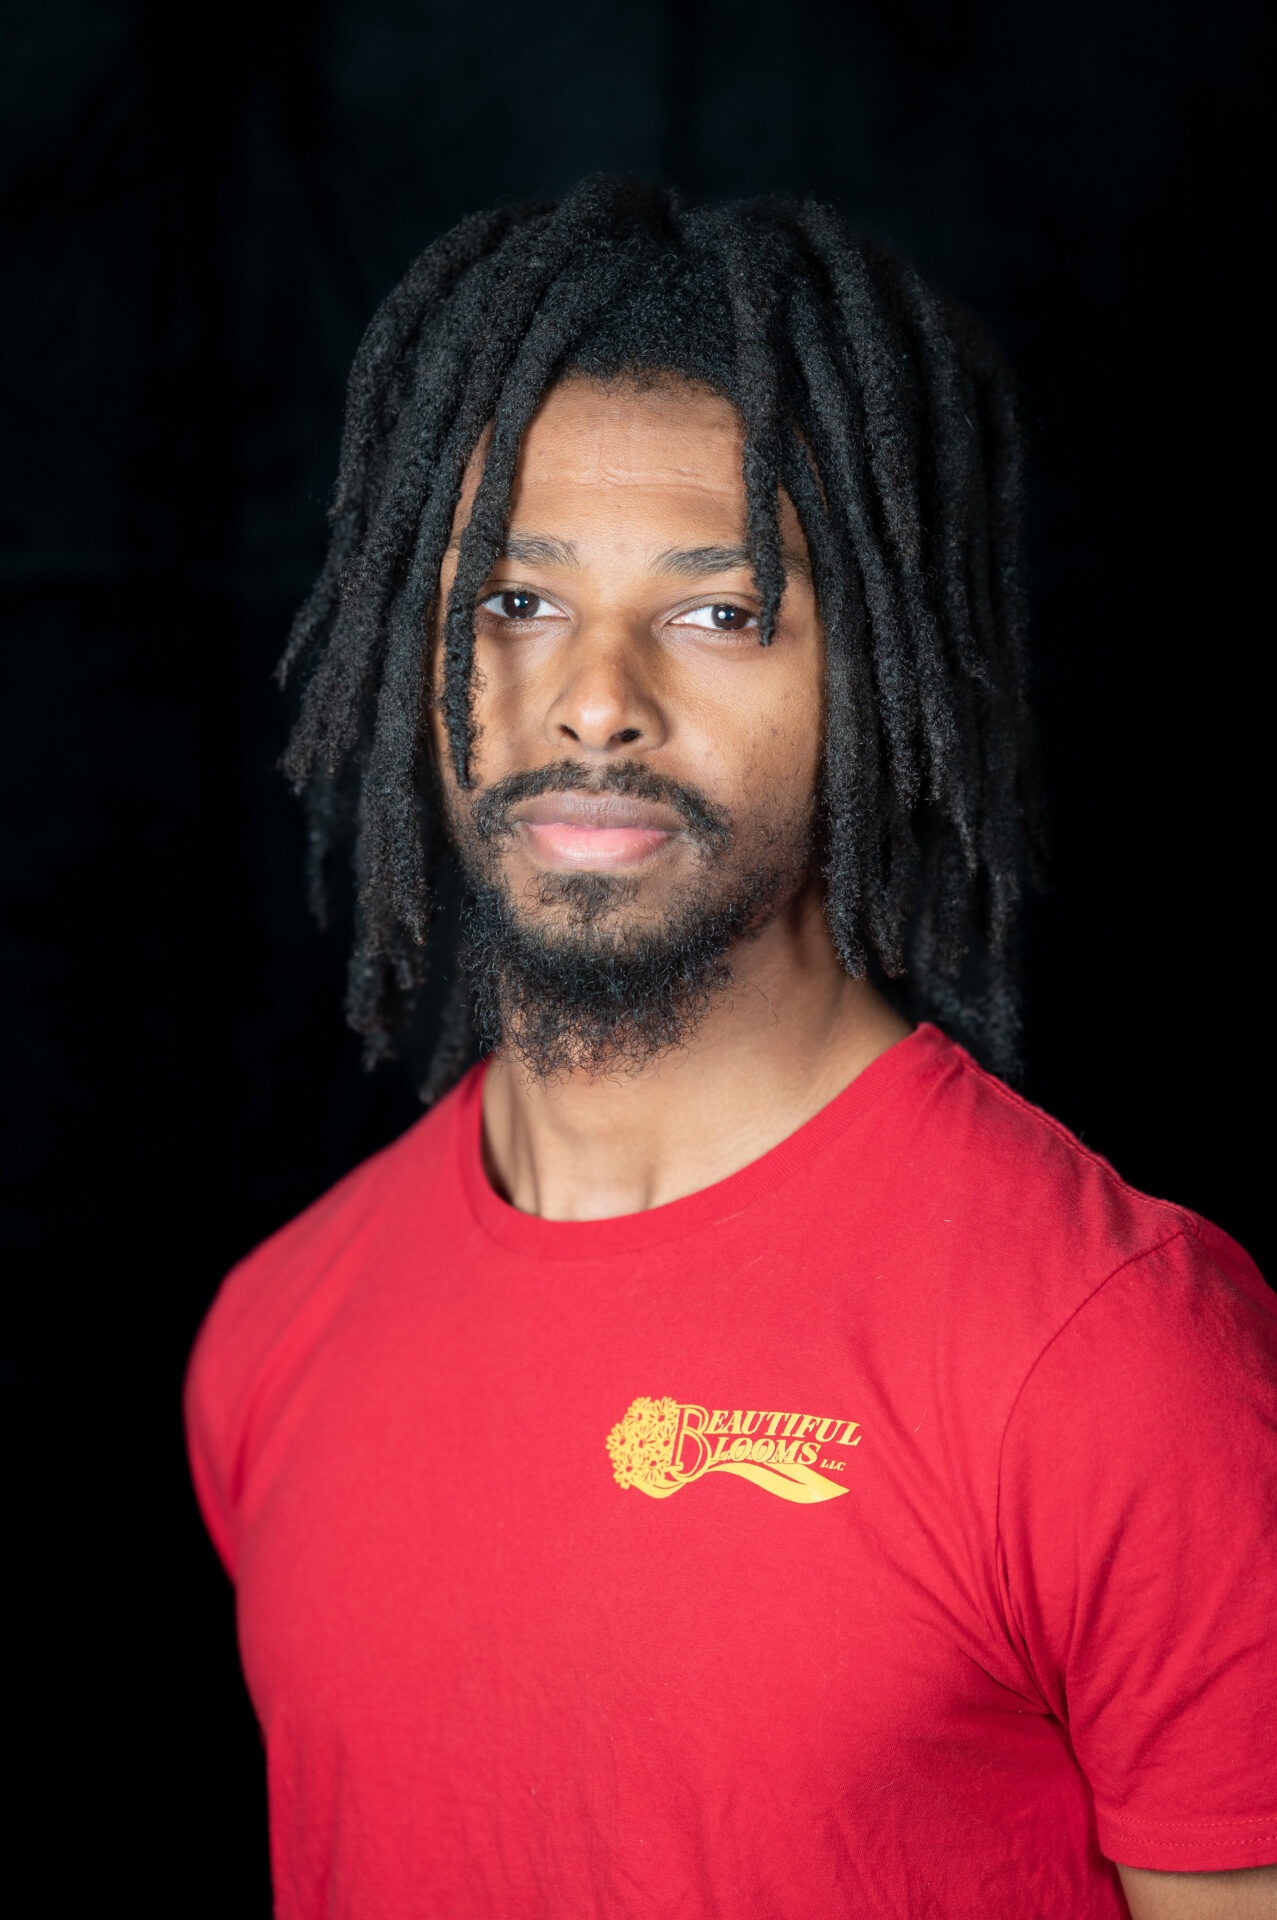 A person with shoulder-length dreadlocks is wearing a red t-shirt and looking calmly at the camera against a dark background.